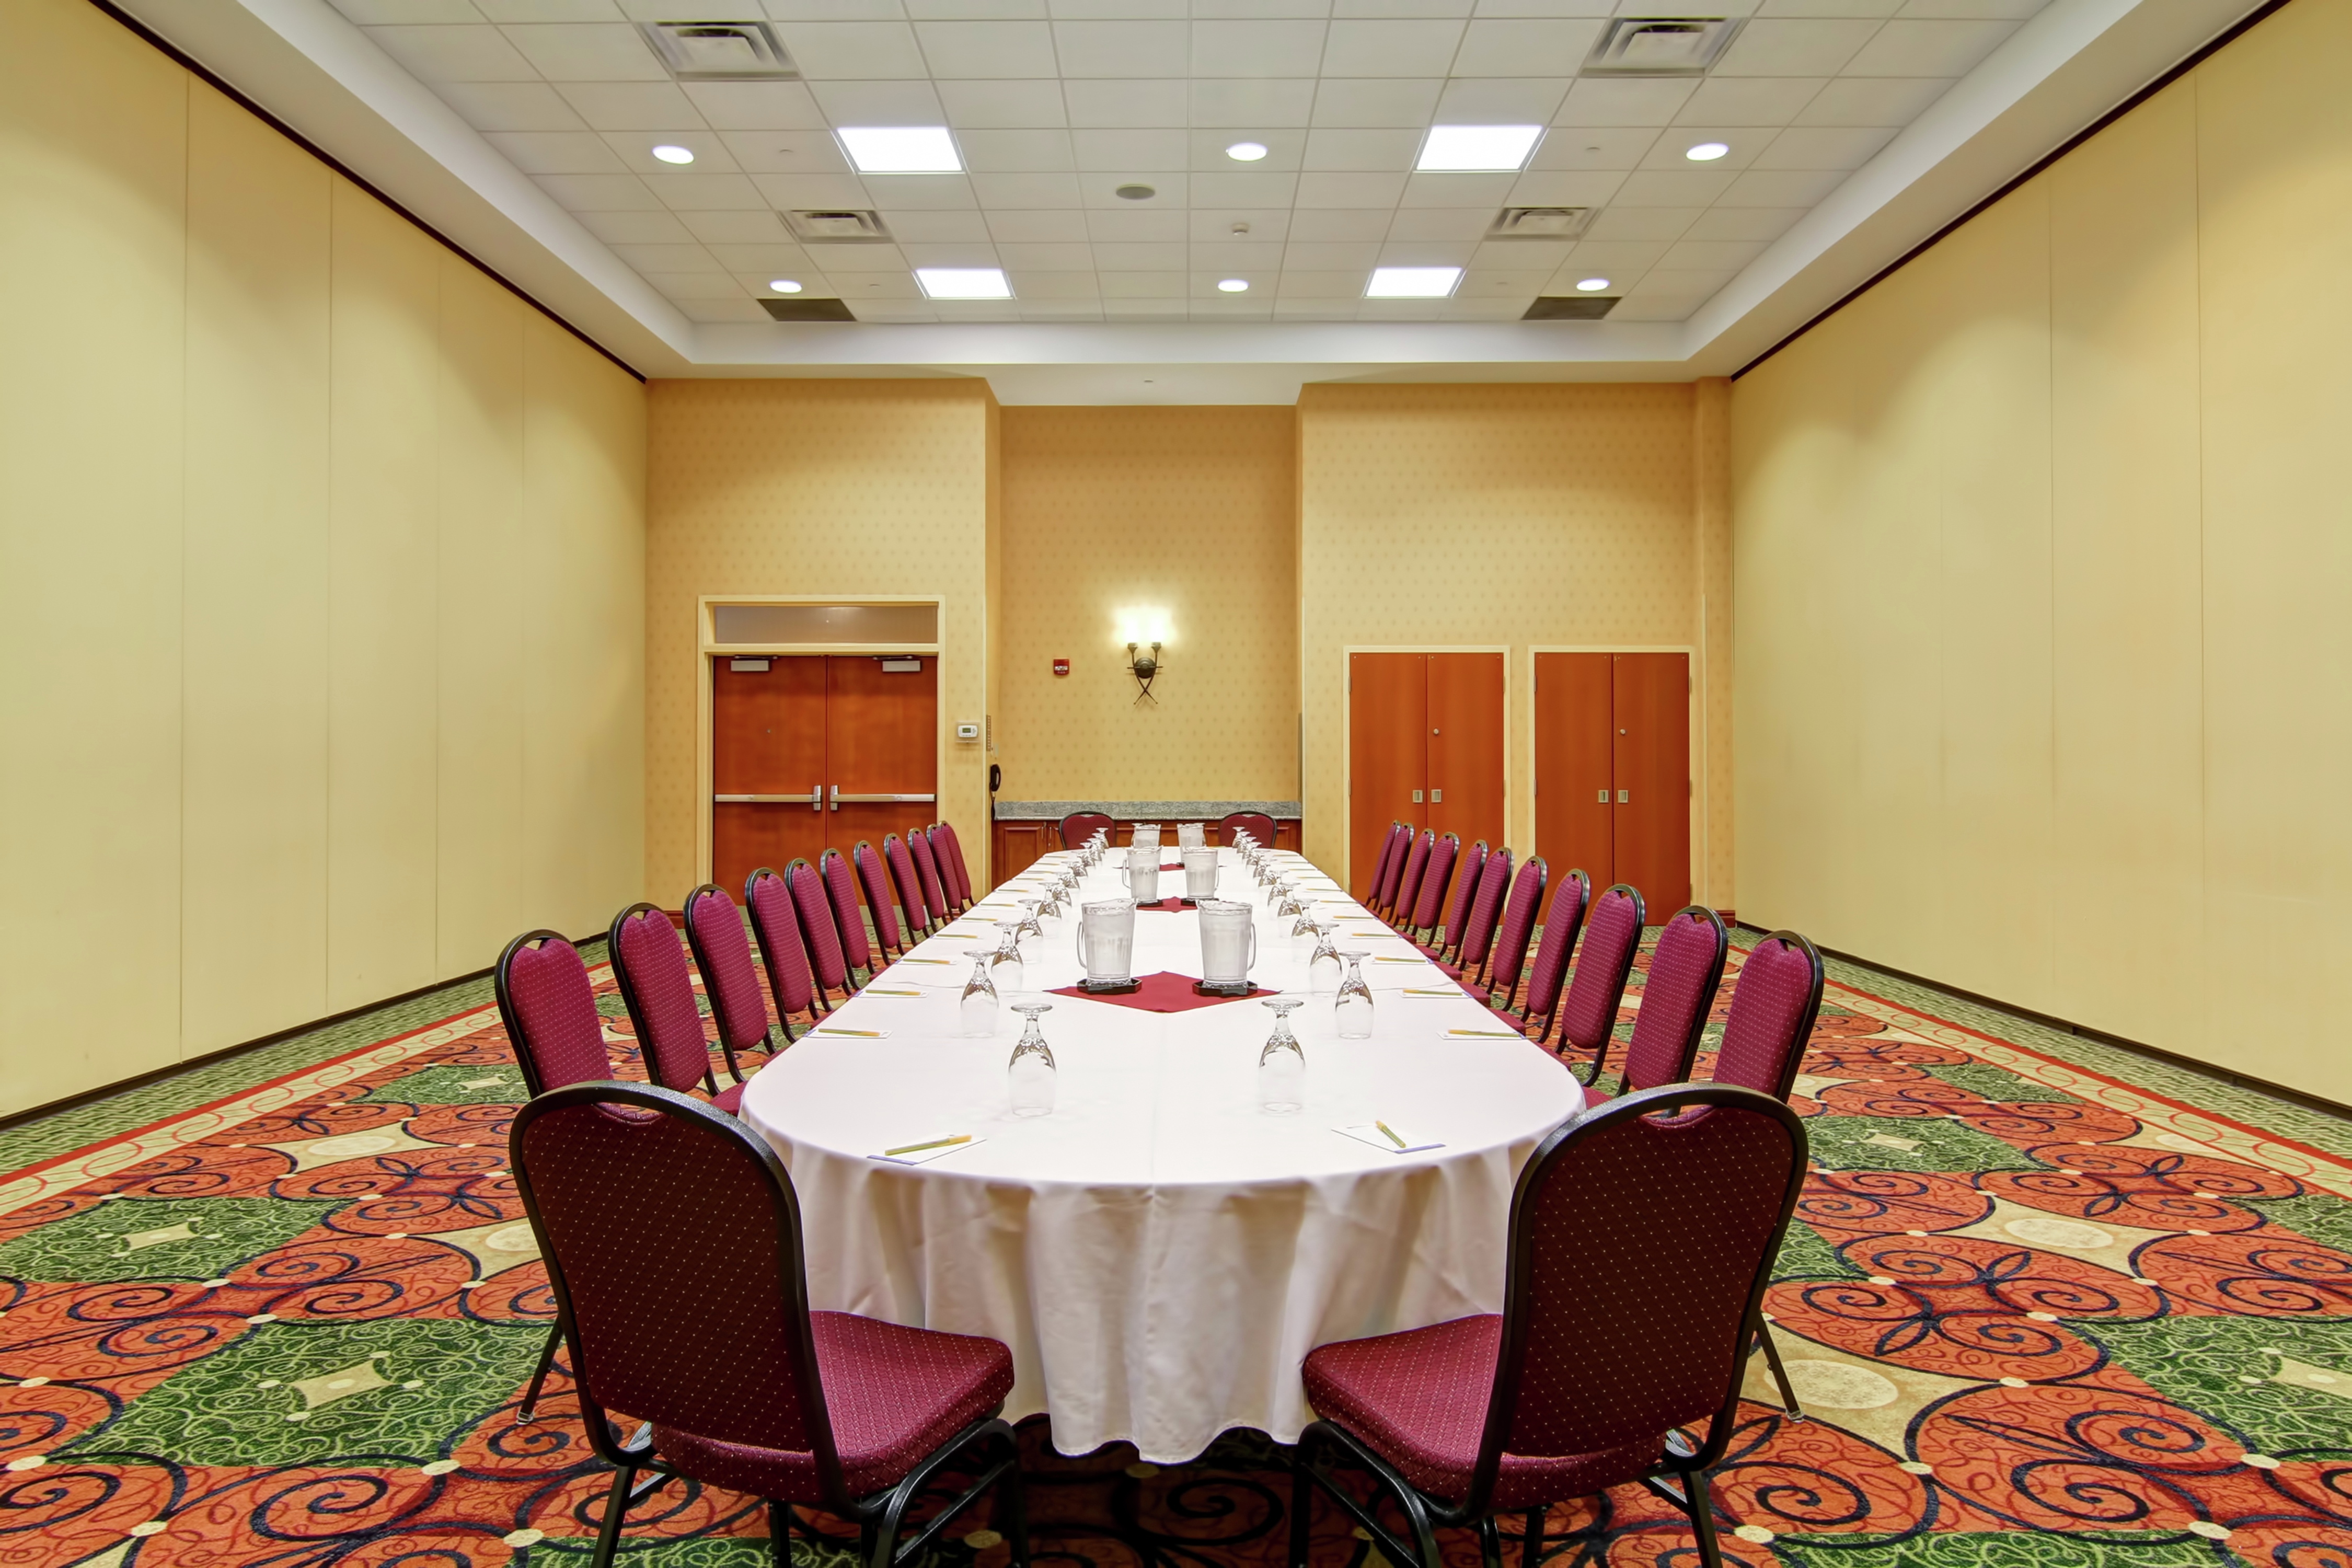 Meeting Space Set Up With Seating at Boardroom Table